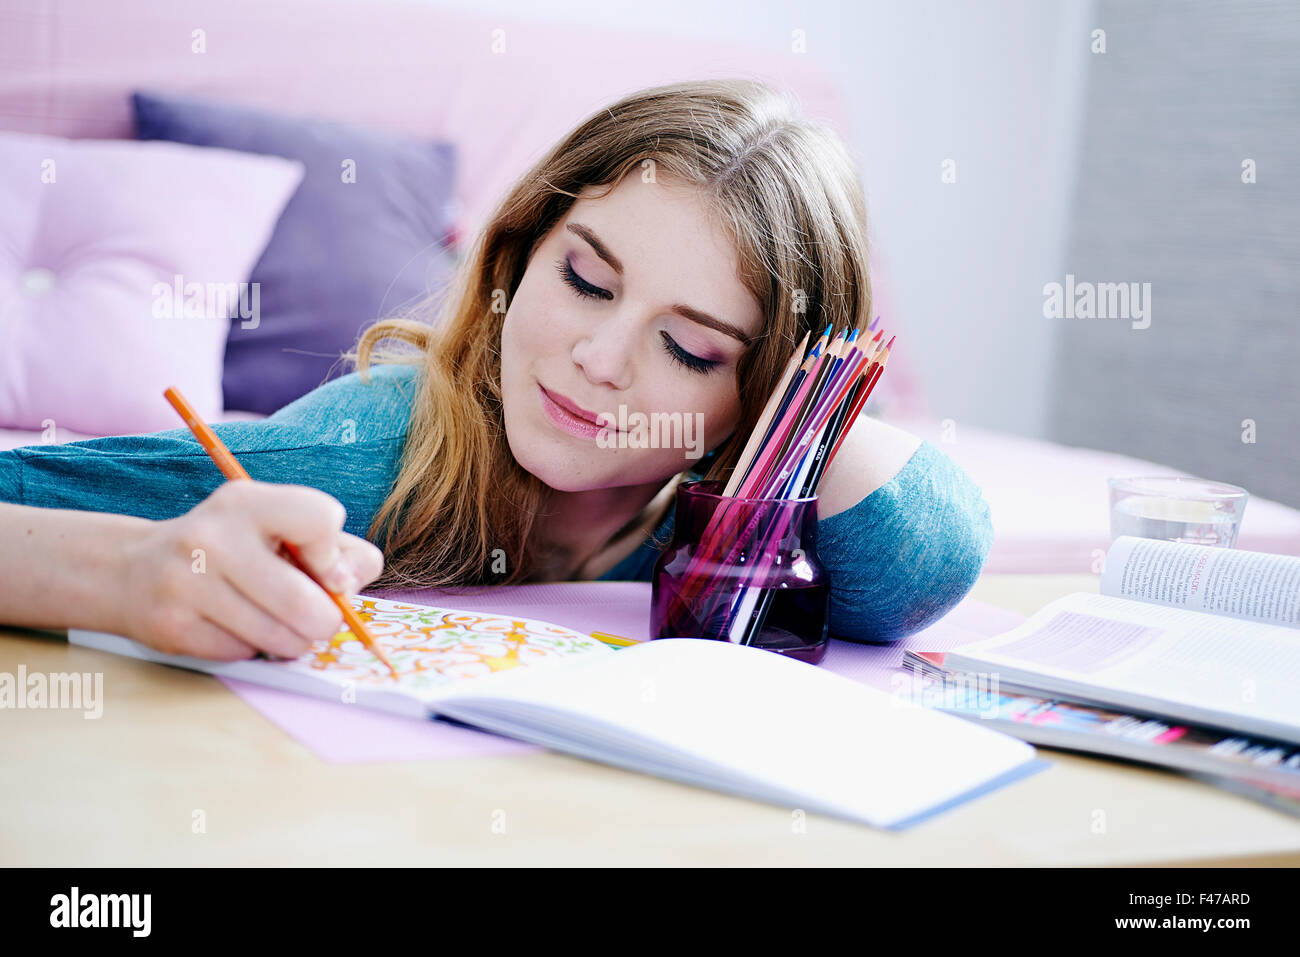 WOMAN COLORING Stock Photo